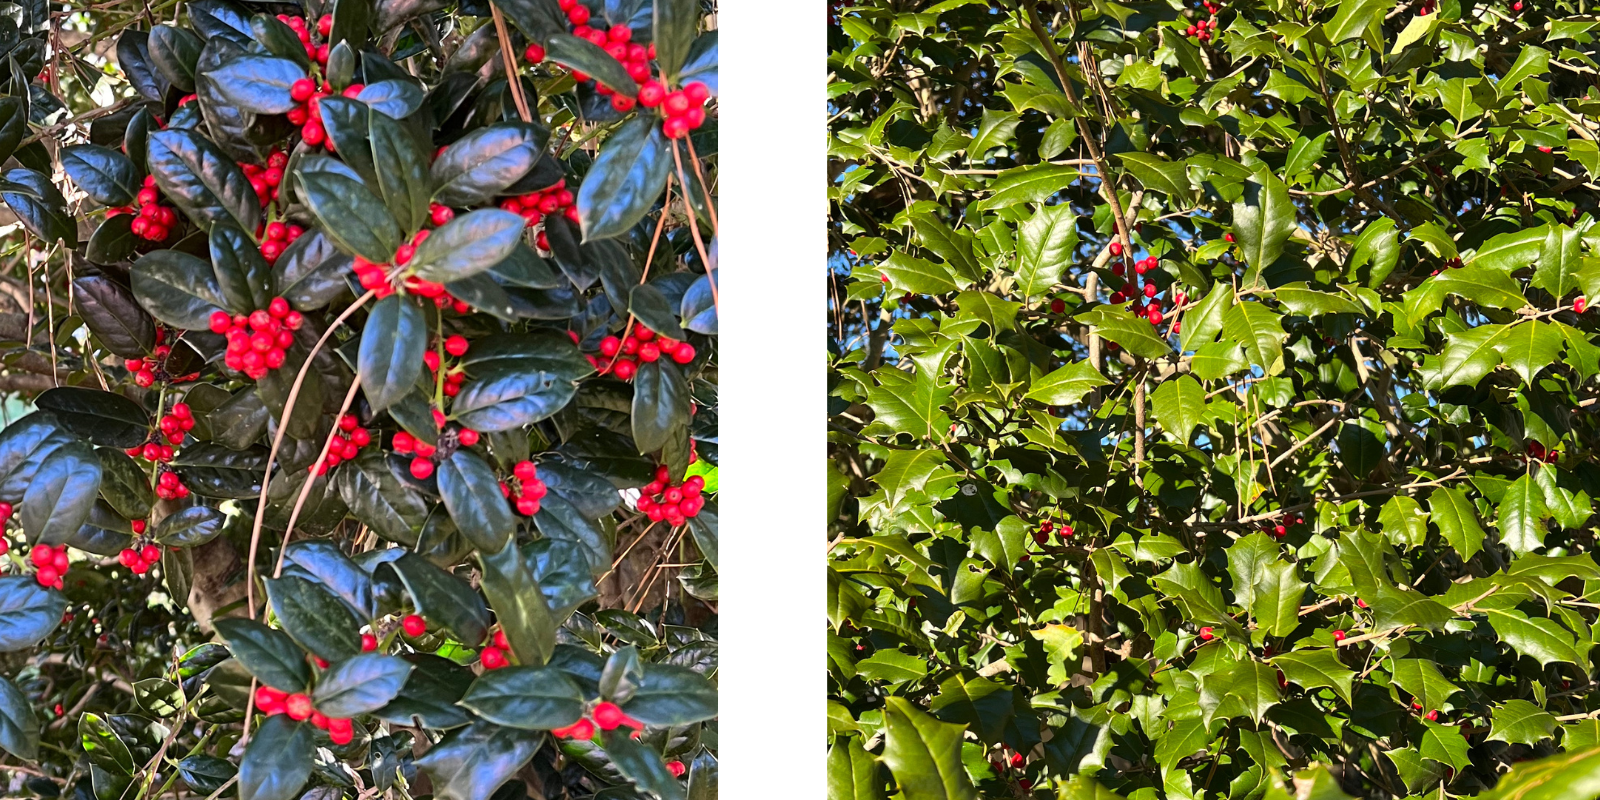 Two photos of holly, with Chinese holly (dark green, waxy leaves with one spike) on the left and American holly (lighter green leaves with multiple spikes) on the right.